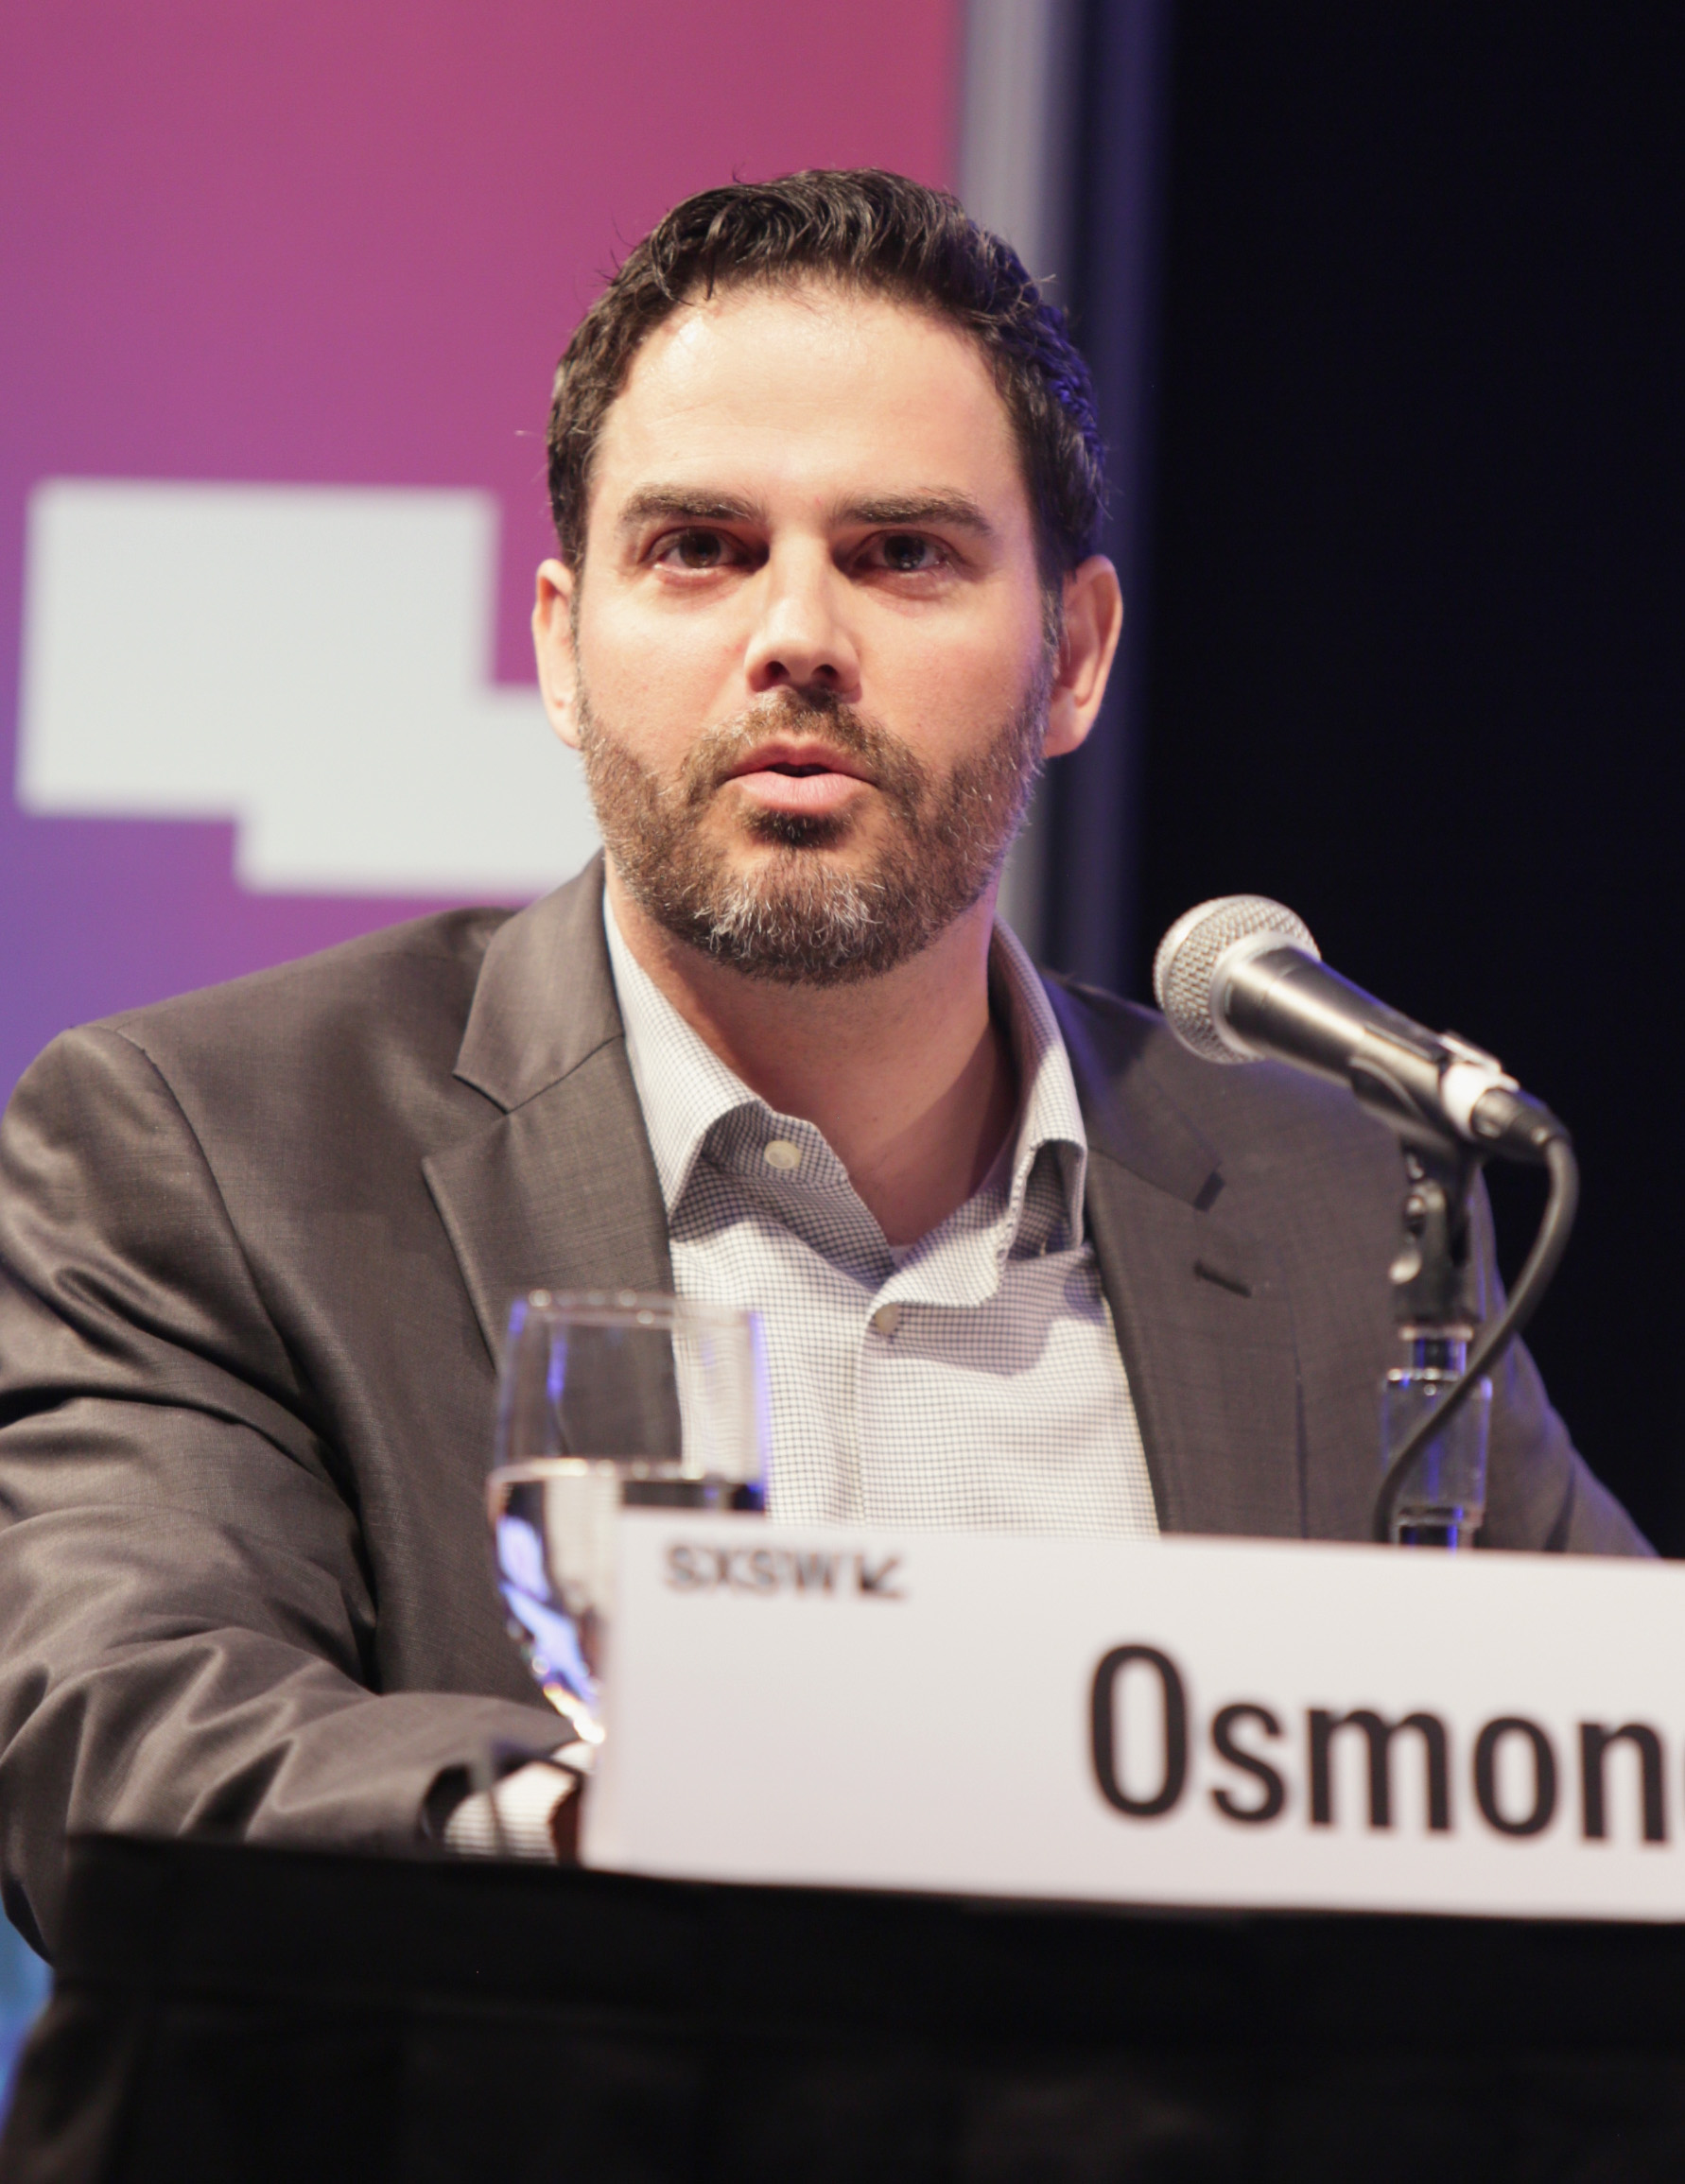 Managing Partner of OzComm Marketing Don Osmond speaks onstage at "15,000-year-old Marketing Strategy: Why It Works" during 2017 SXSW Conference and Festivals at Austin Convention Center on March 14, 2017, in Austin, Texas | Source: Getty Images